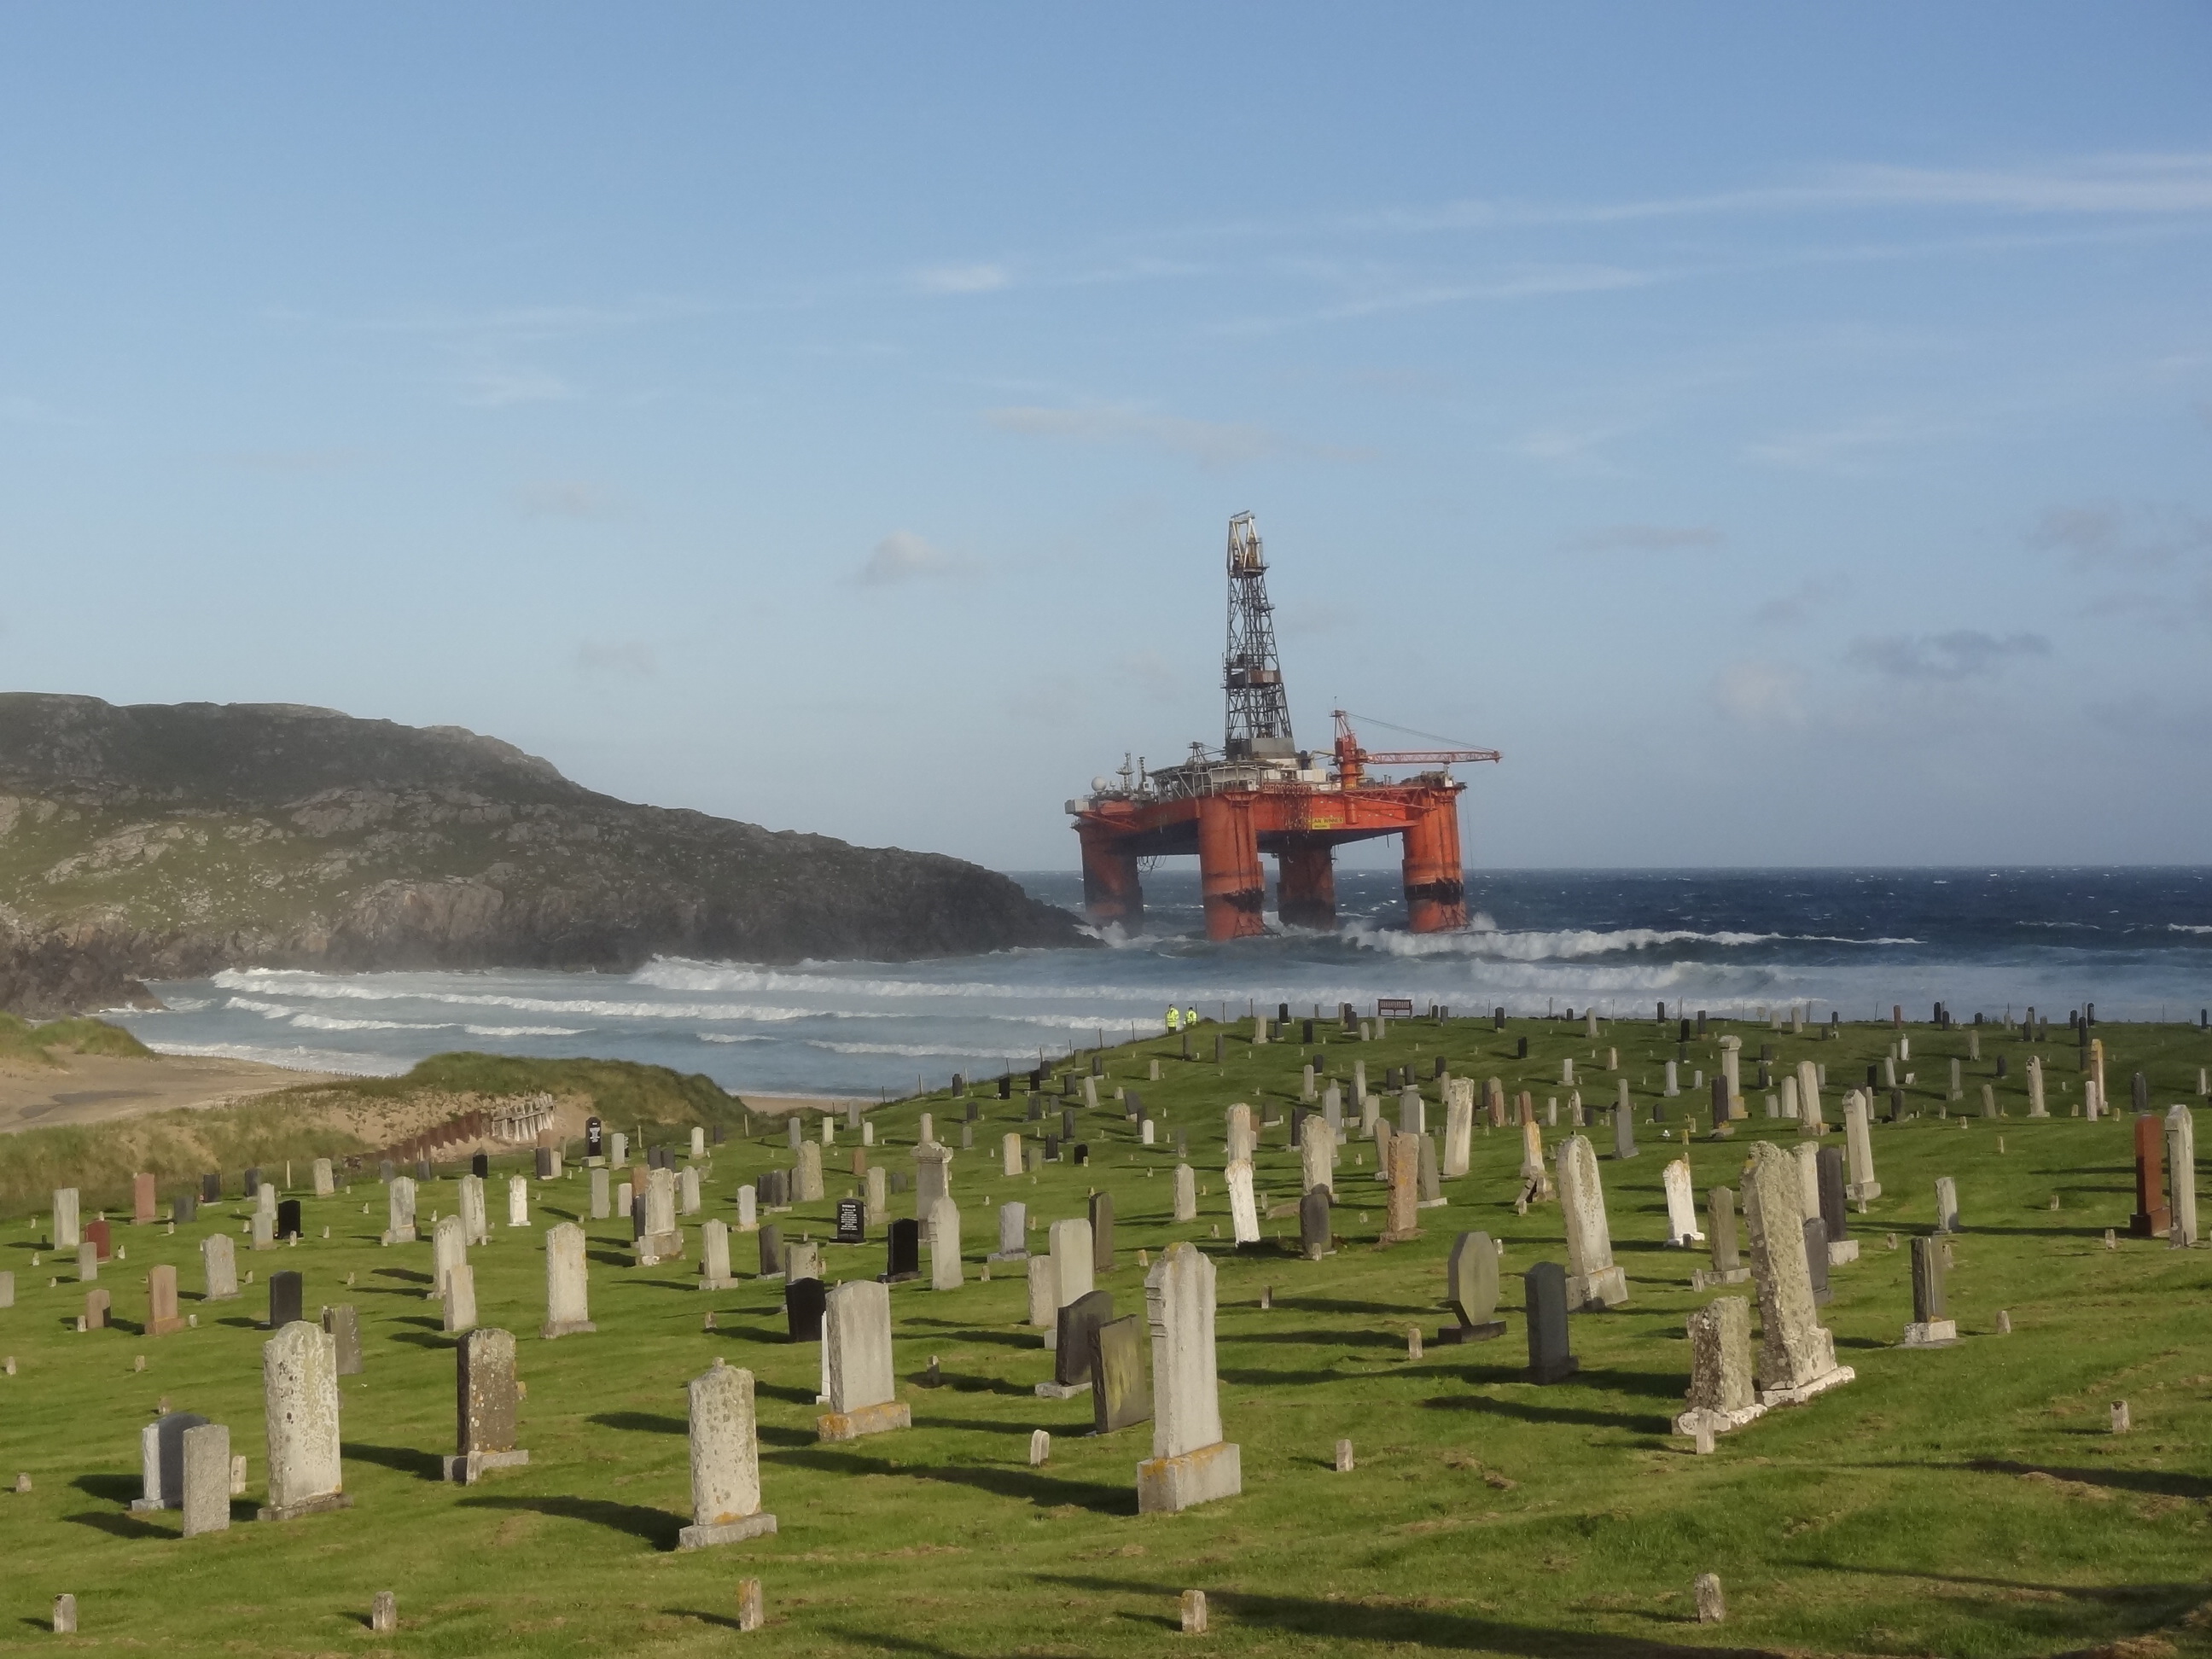 Grounded Transocean rig